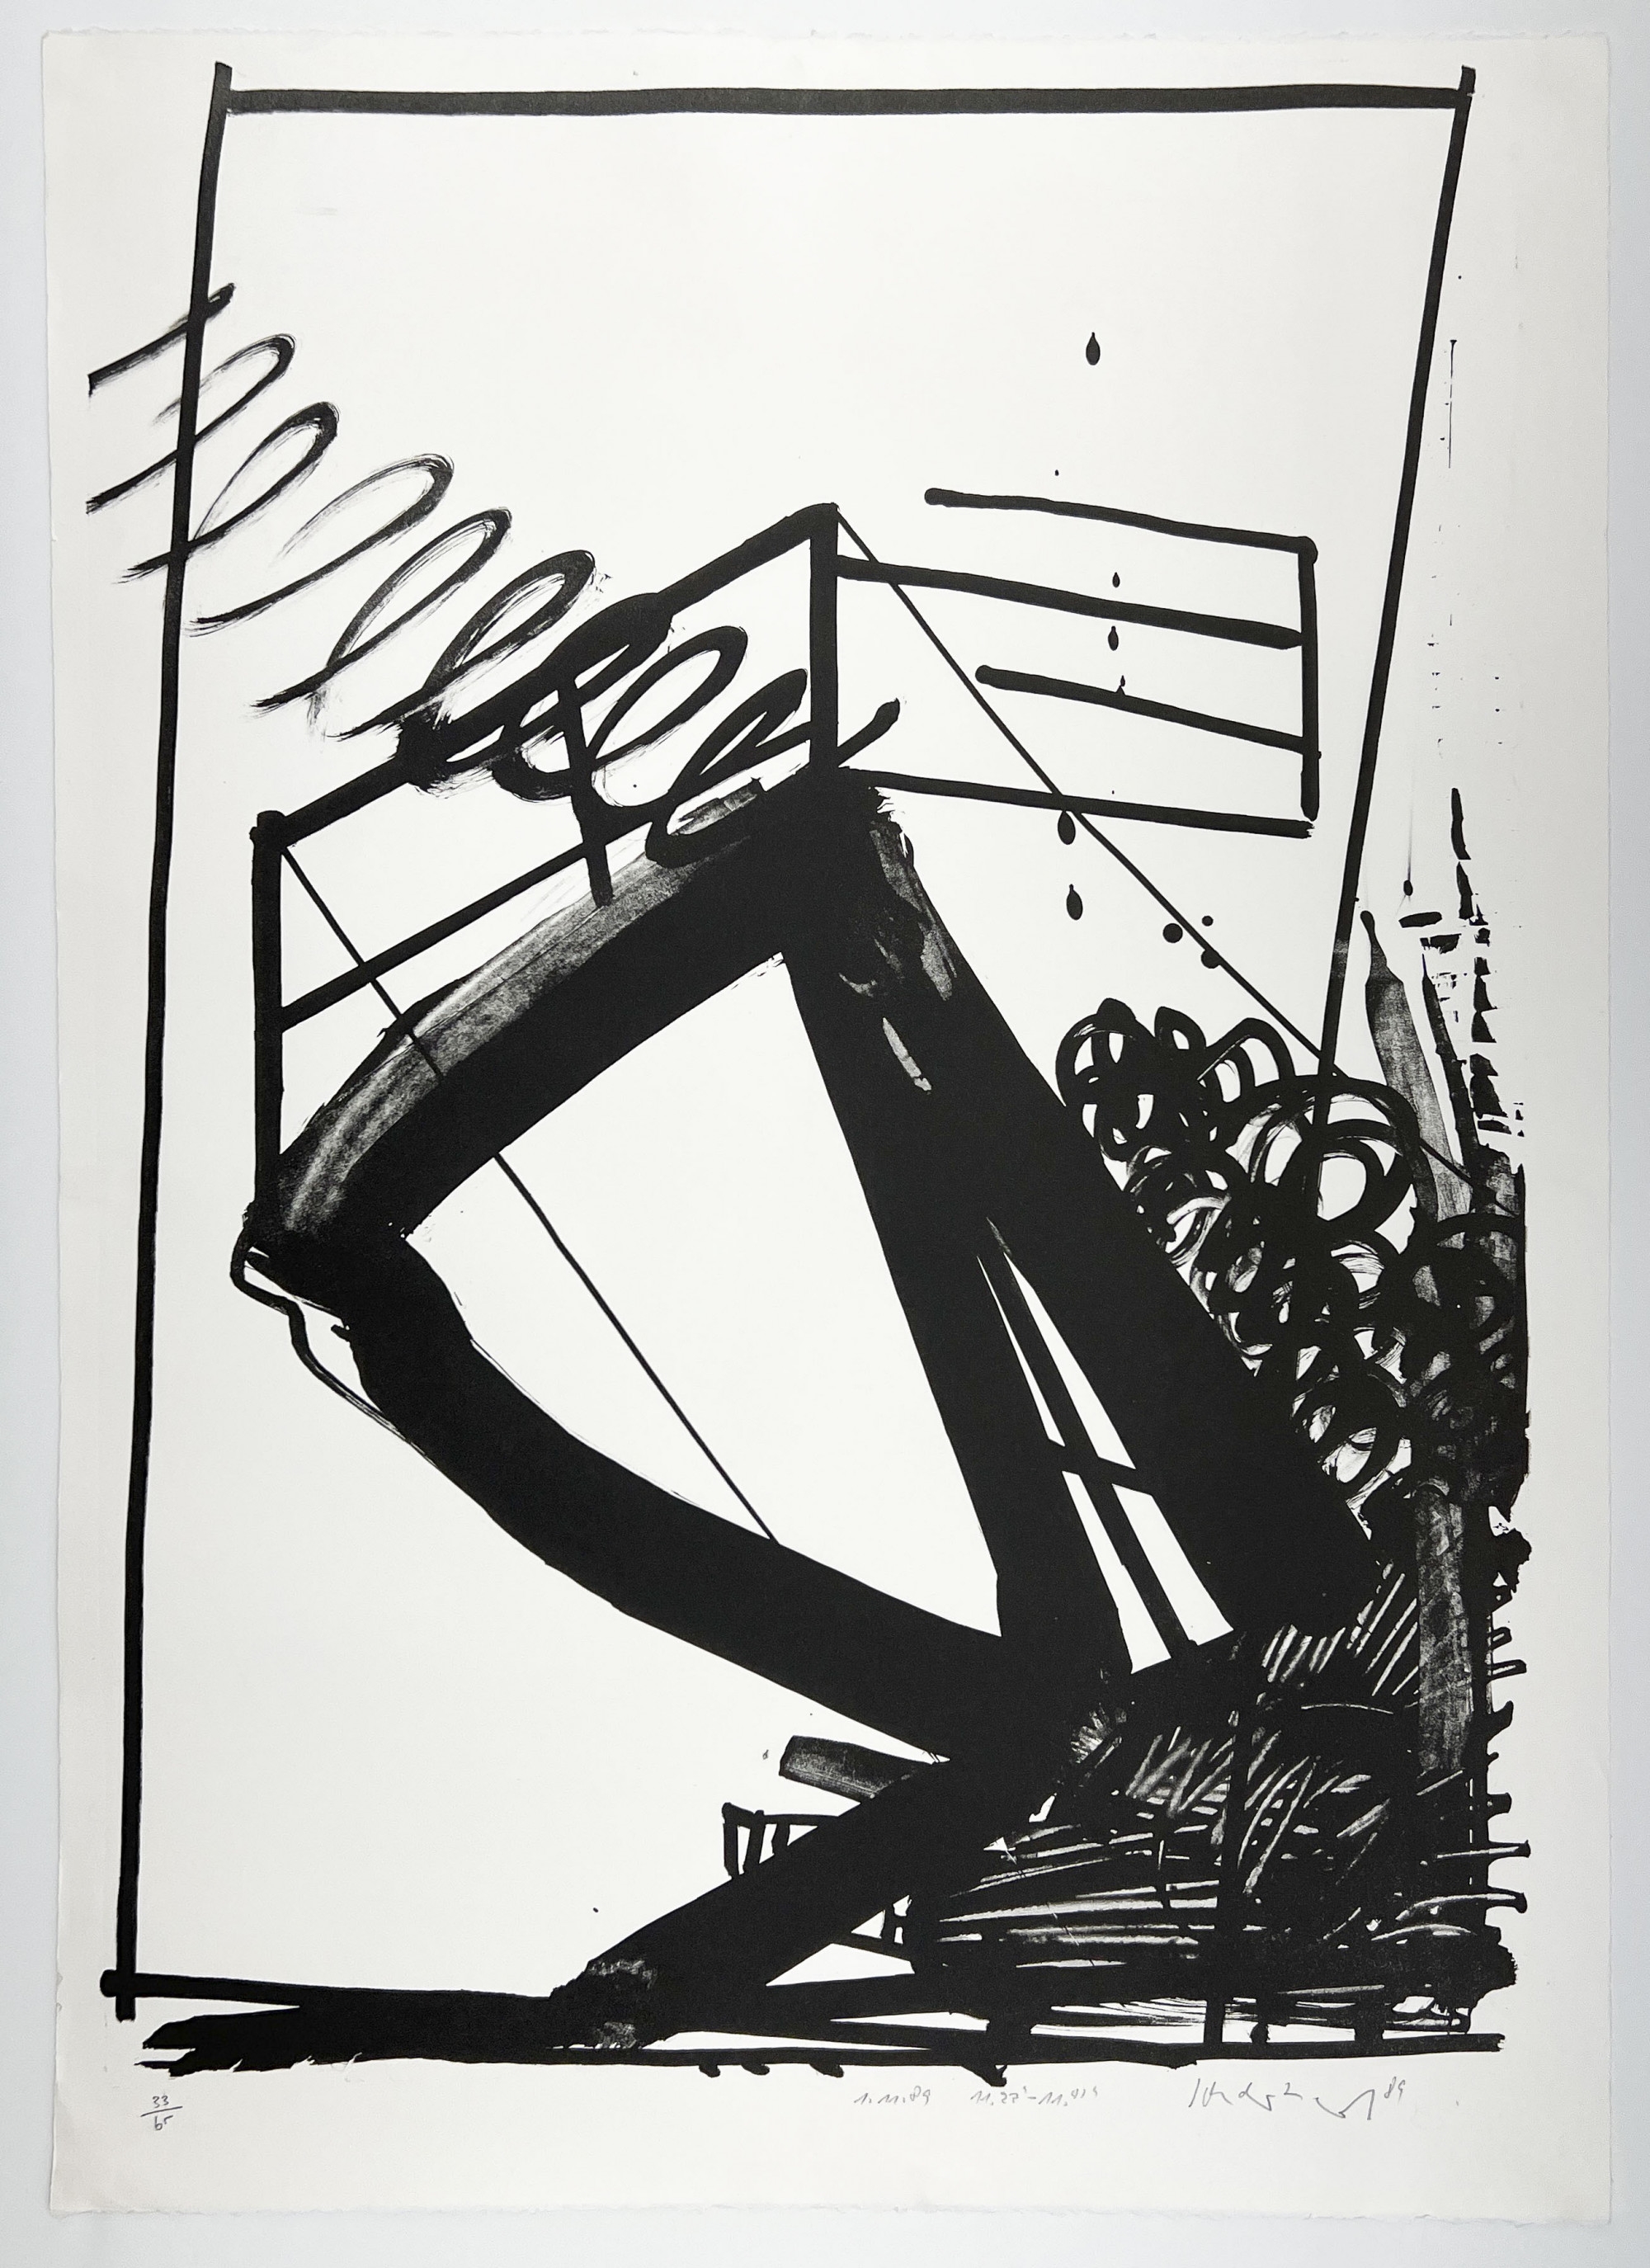 Artwork by Kurt Rudolf Hoffmann‏ Sonderborg, Untitled (Composition in Black) (1998), Made of lithograph